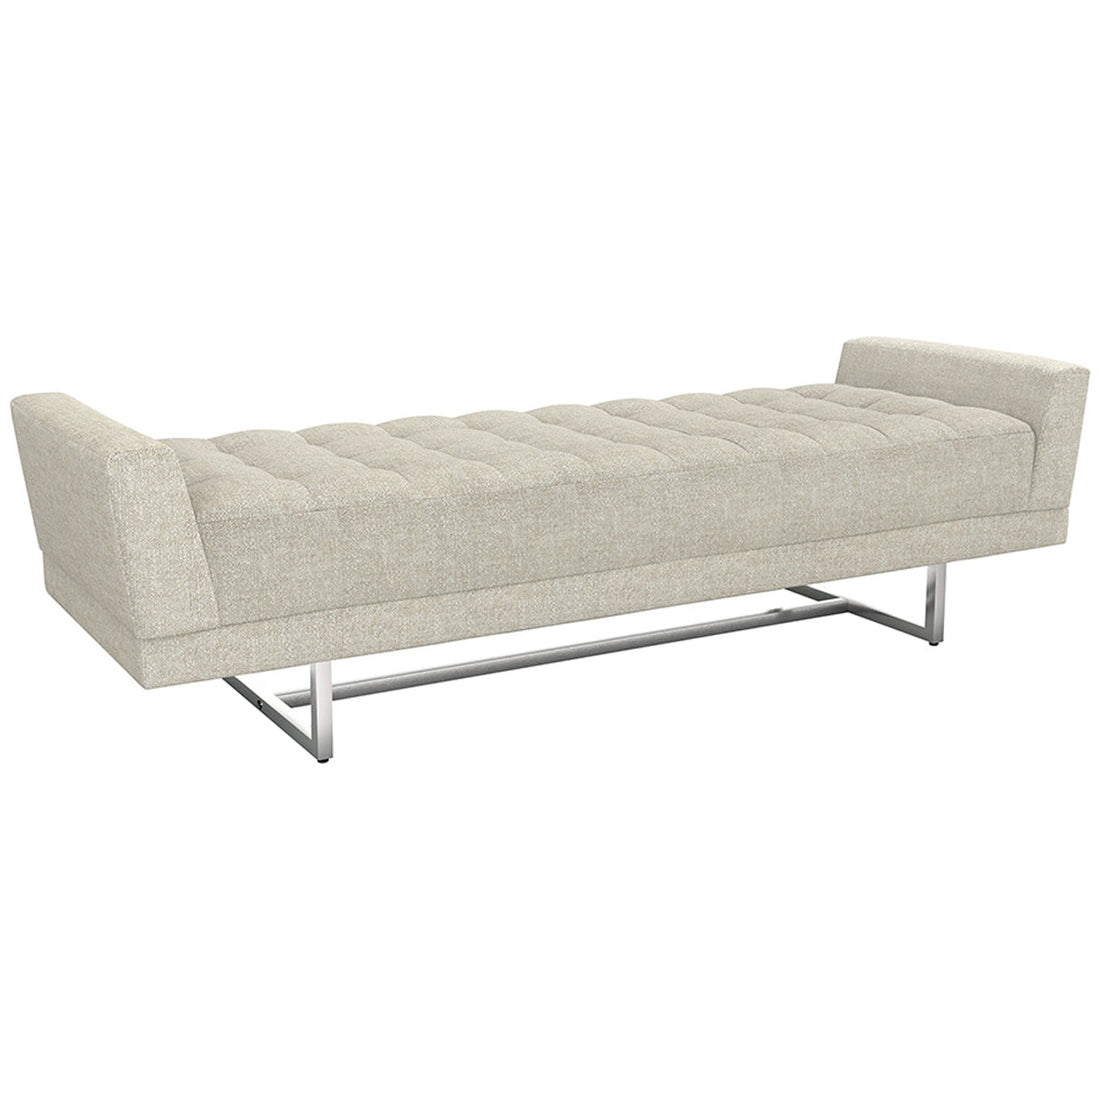 Interlude Home Luca King Bench - Loma Weave